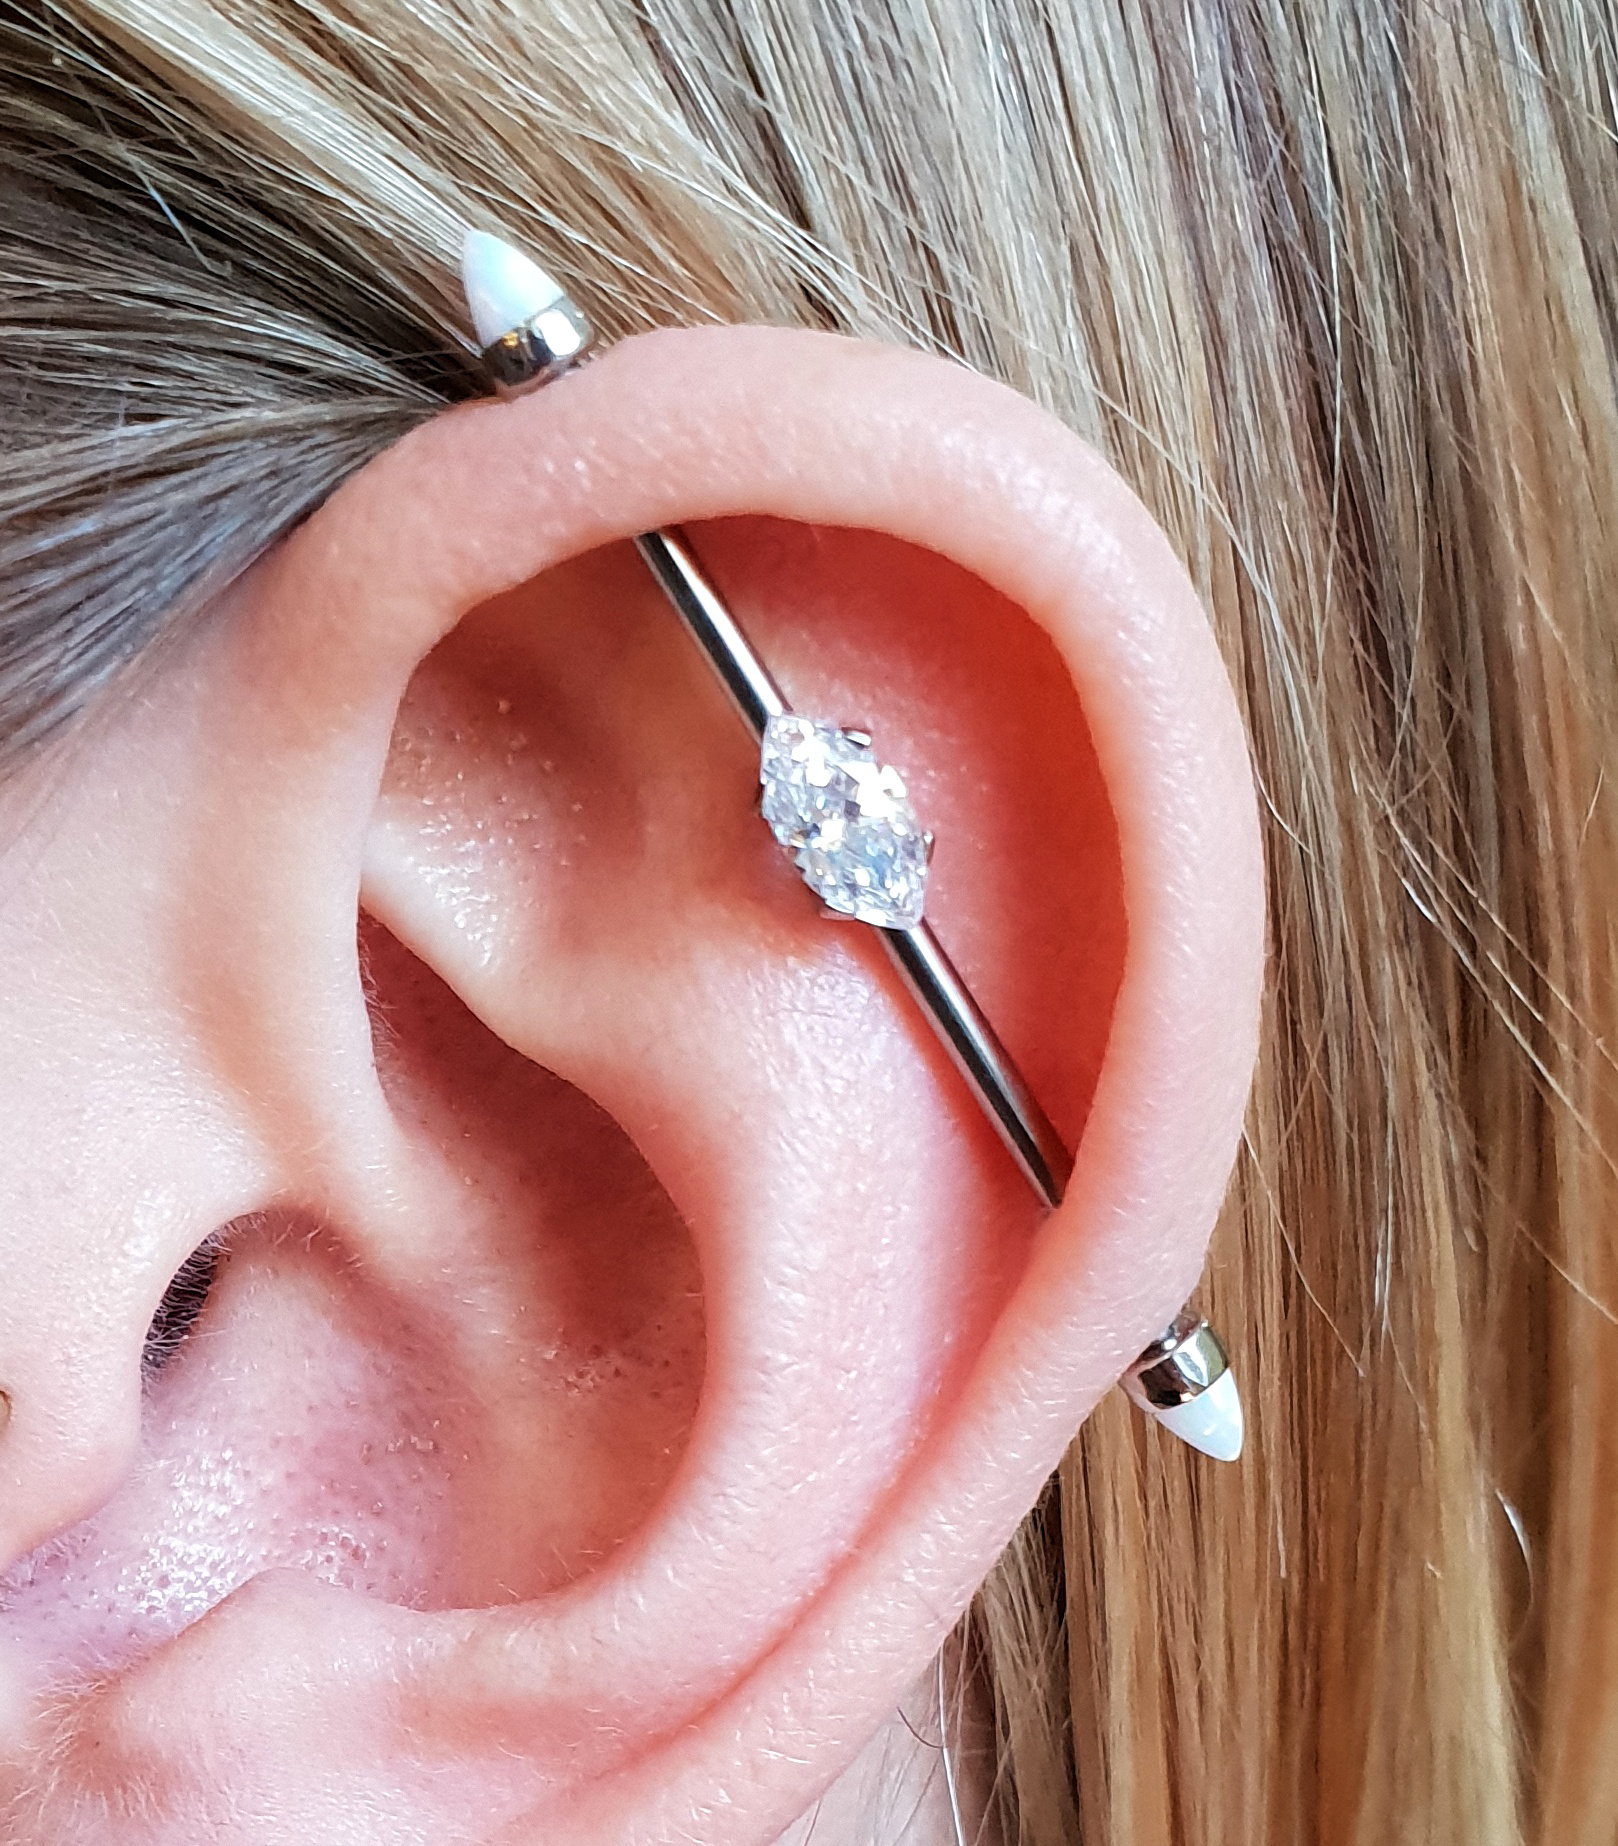 an industrial piercing in titanium with a marquise horizontal cz gem from Anatometal, either end is a white opal cone from the same company